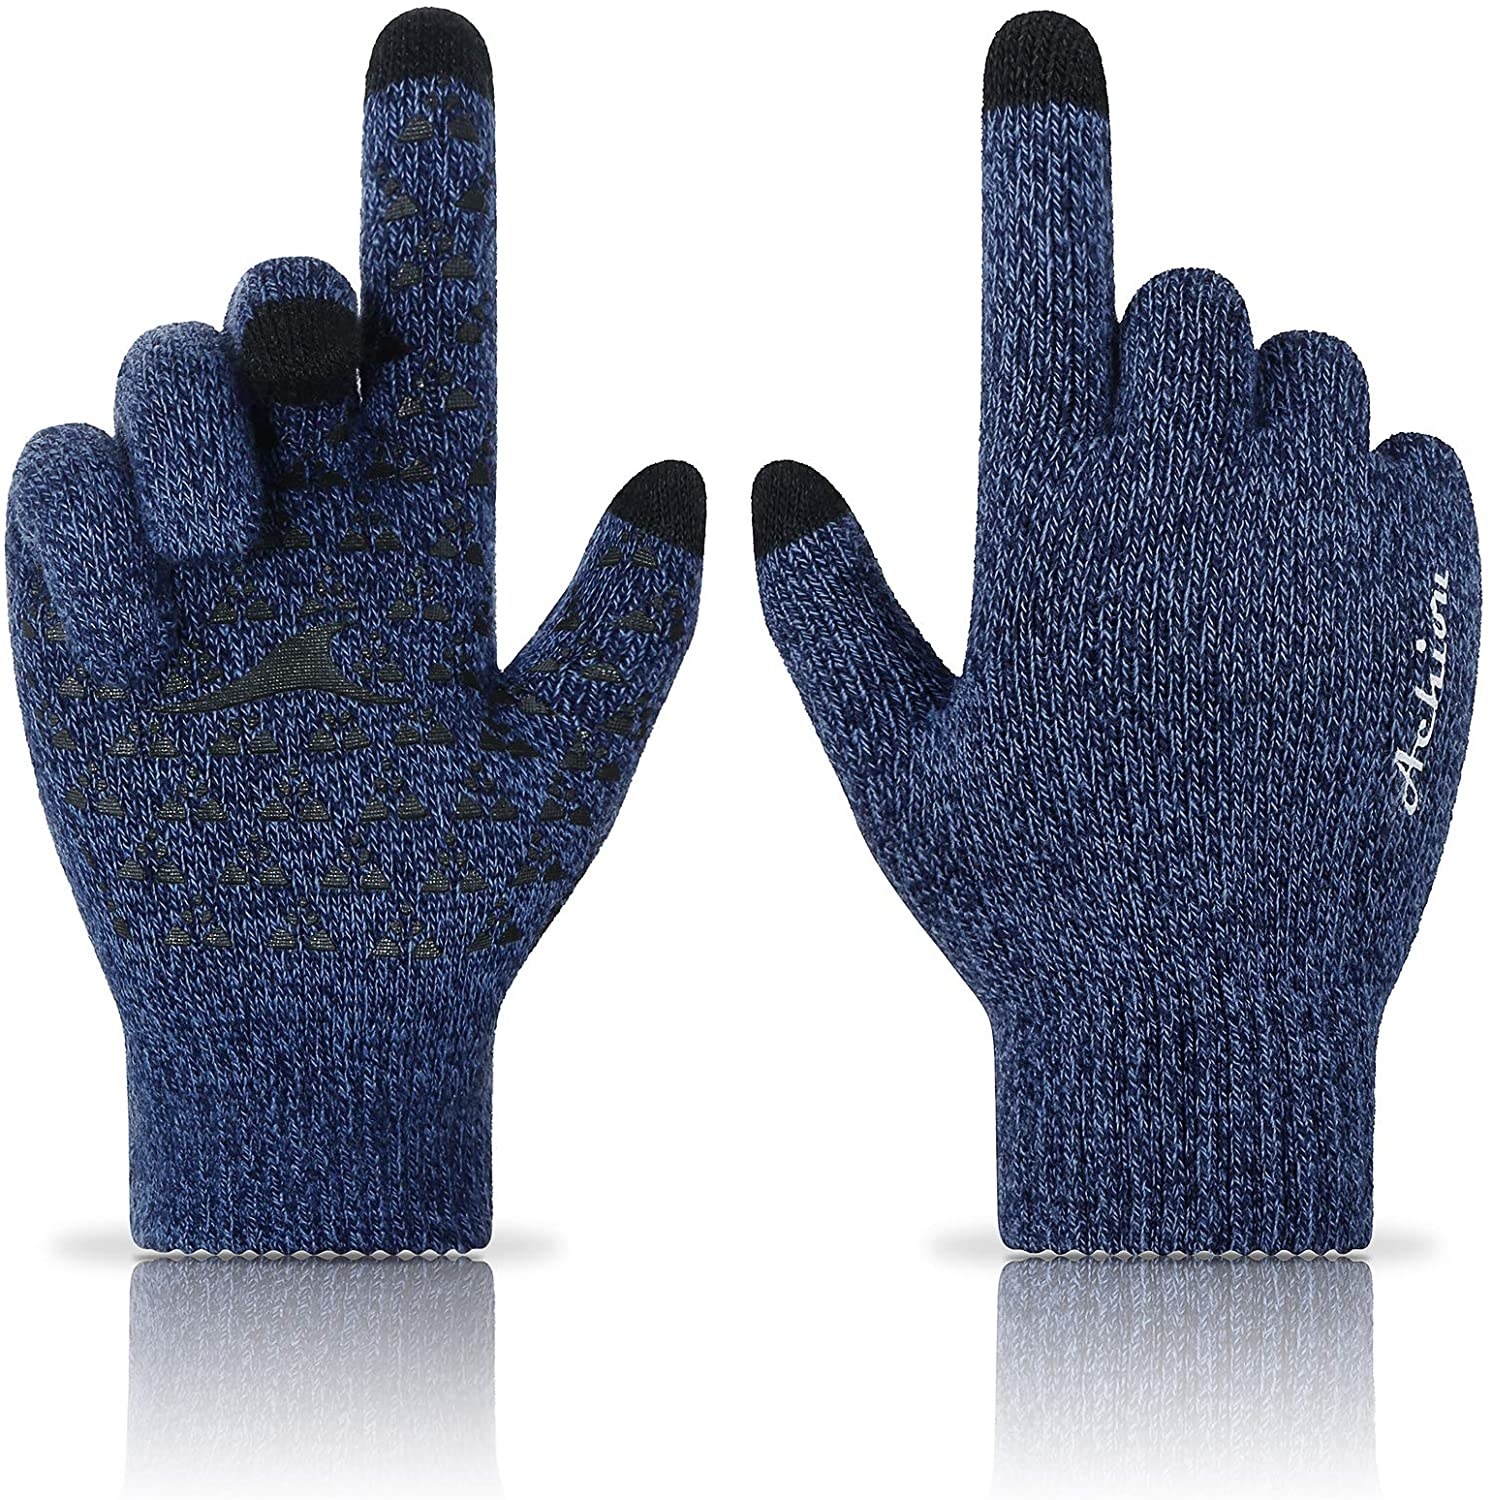 the hand-gloves in blue with black touch-screen friendly gloves 